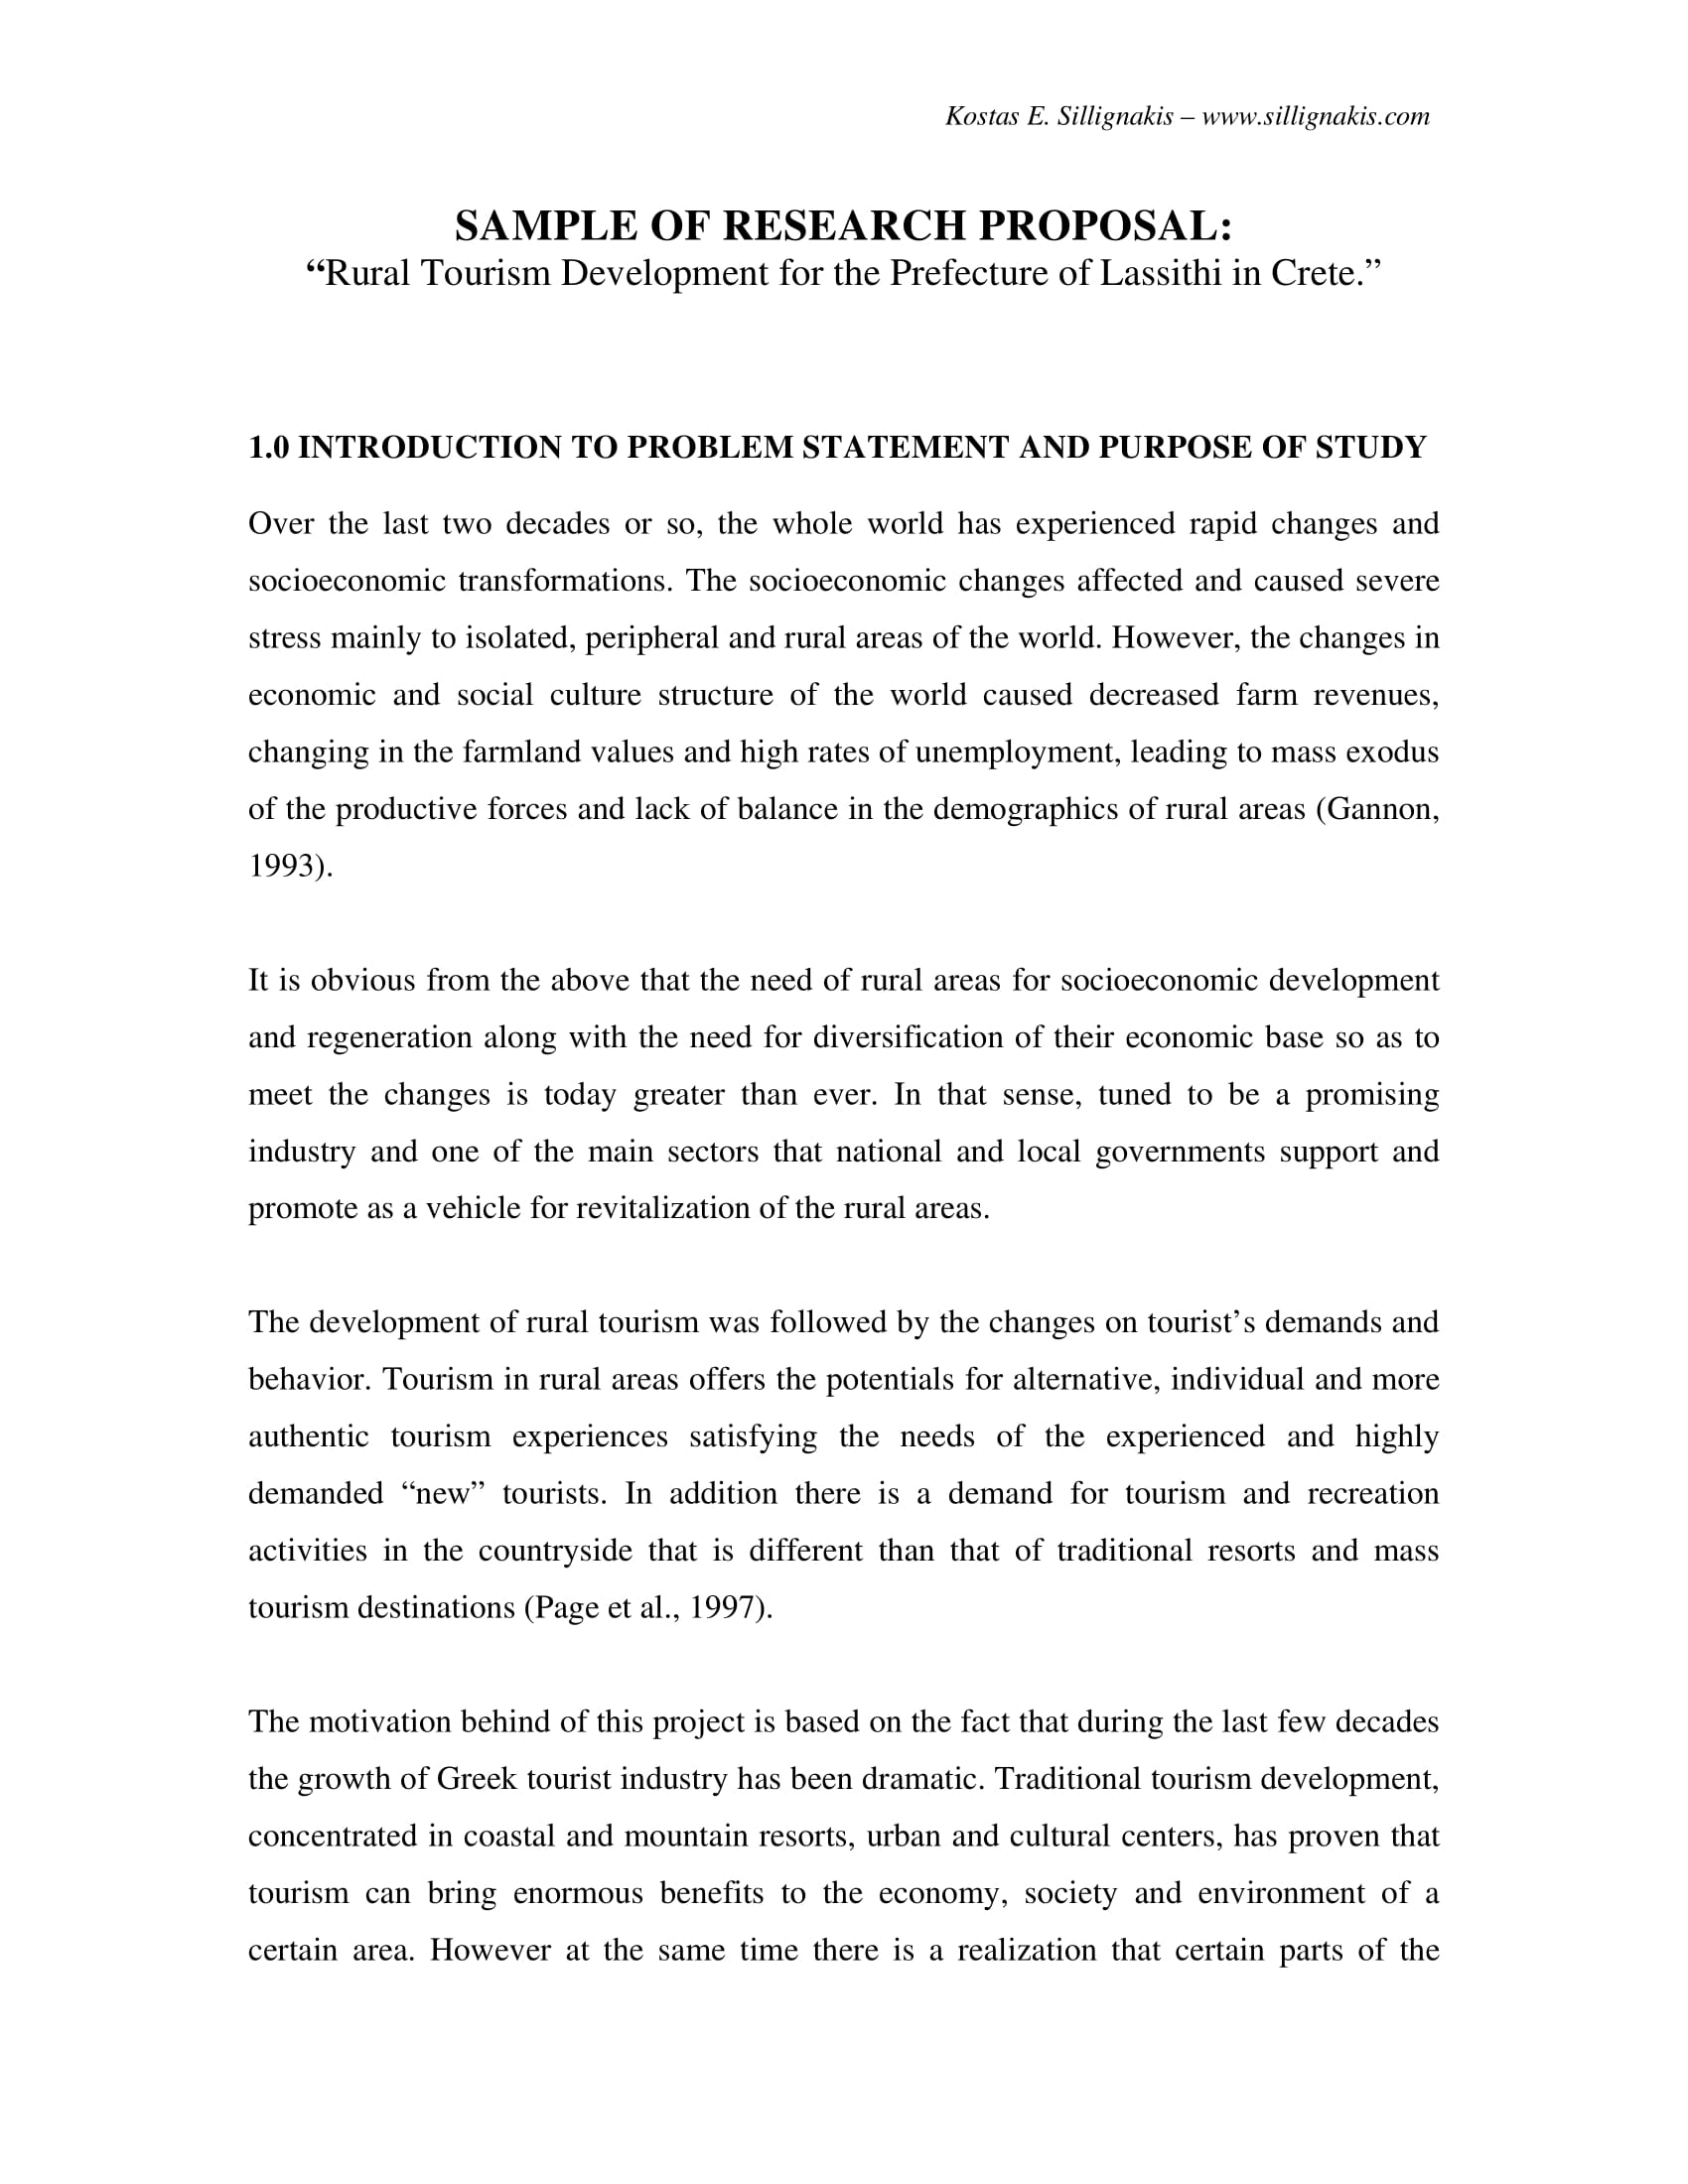 p research proposal tourism no abstract